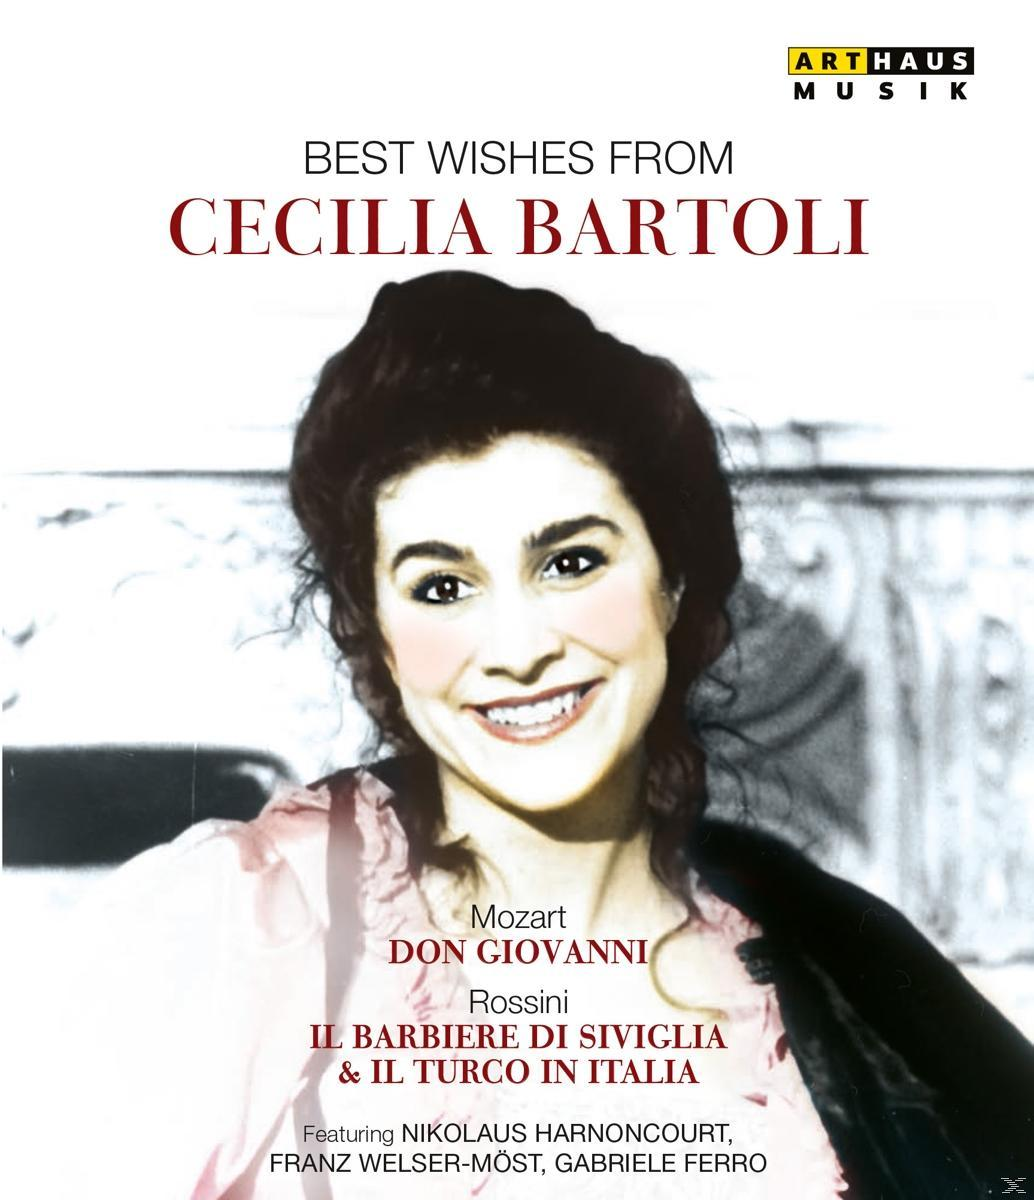 VARIOUS, House, The Of Bartoli Bartoli, Orchestra Choir Cologne Choir Stuttgart Opera Chorus Best Cecilia Of Wishes City Zurich Radio From - Cecilia Symphony Opera, (DVD) And - The